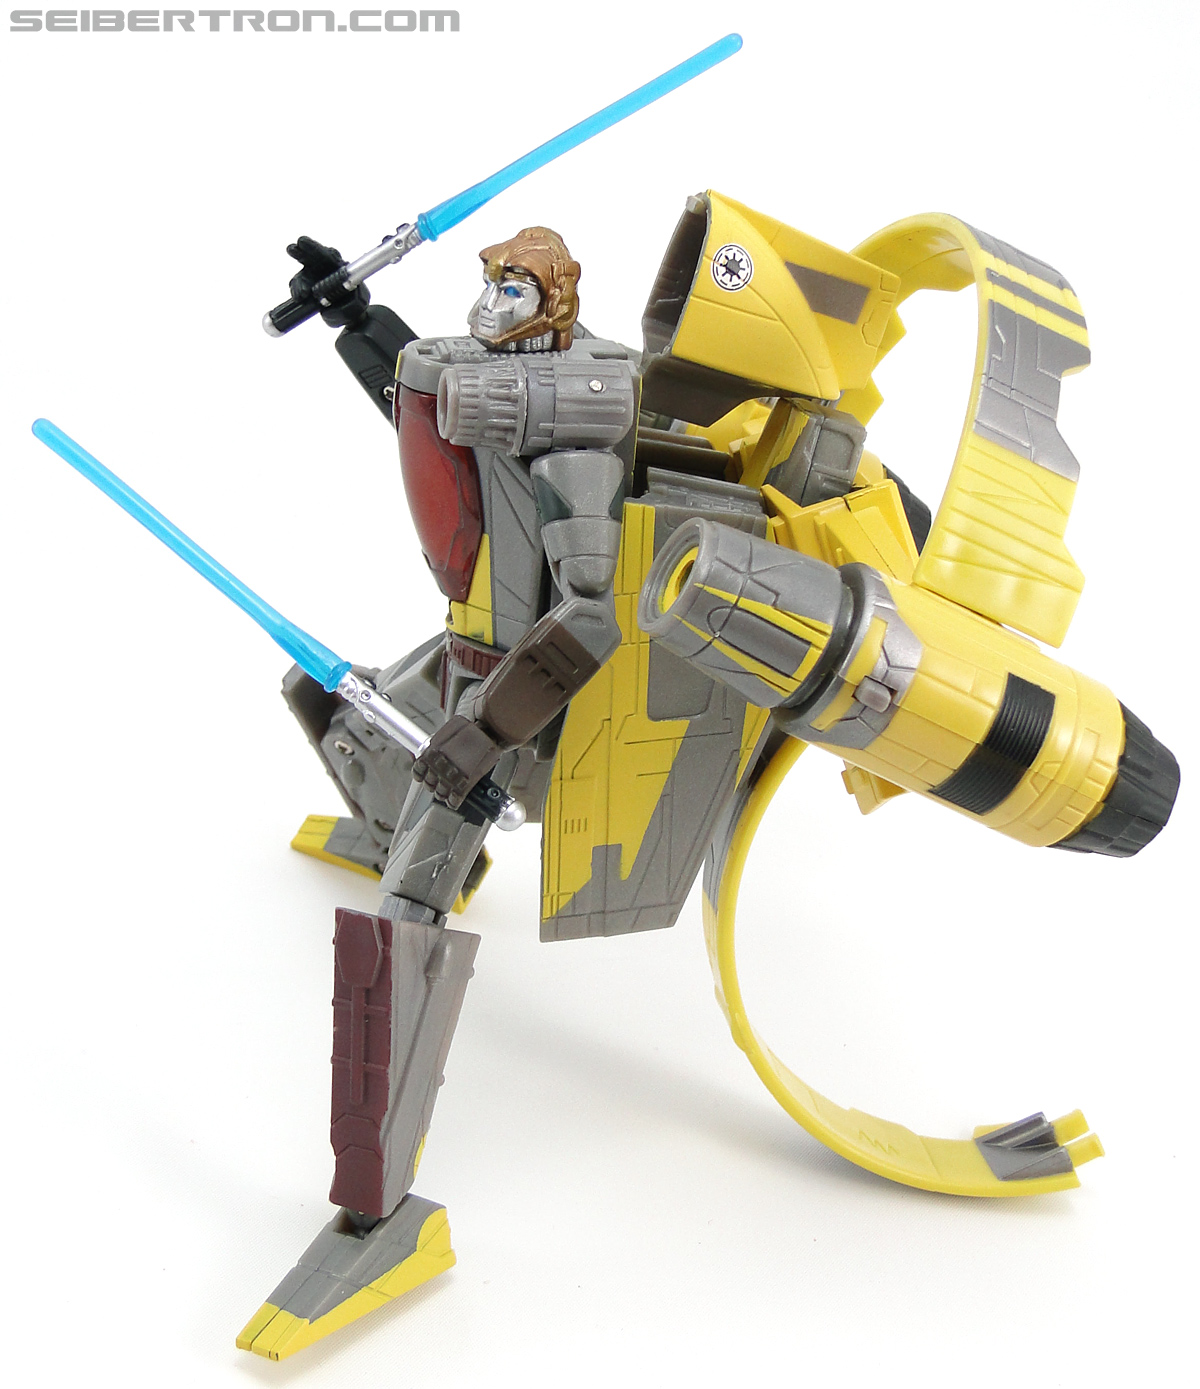 Star Wars Transformers Anakin Skywalker (Jedi Starfighter with Hyperspace Docking Ring) (Image #92 of 131)